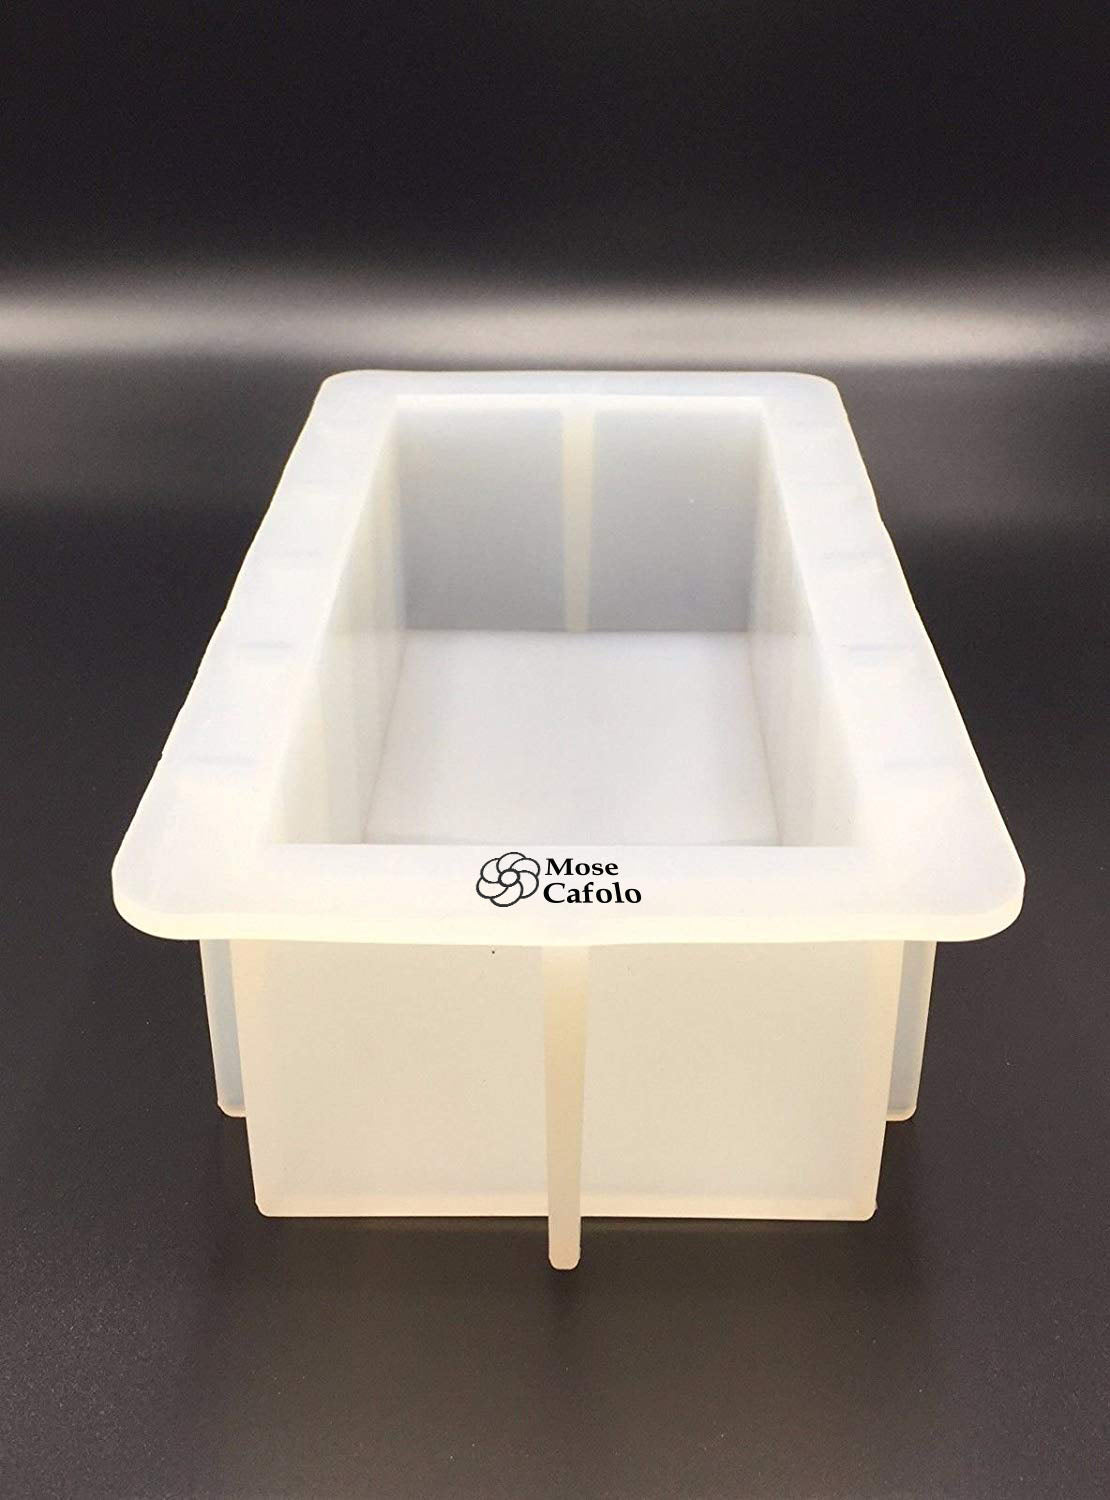 Rectangular Silicone Soap Mold Flexible Loaf Mould With Wood Box for DIY  Handmade Soap 